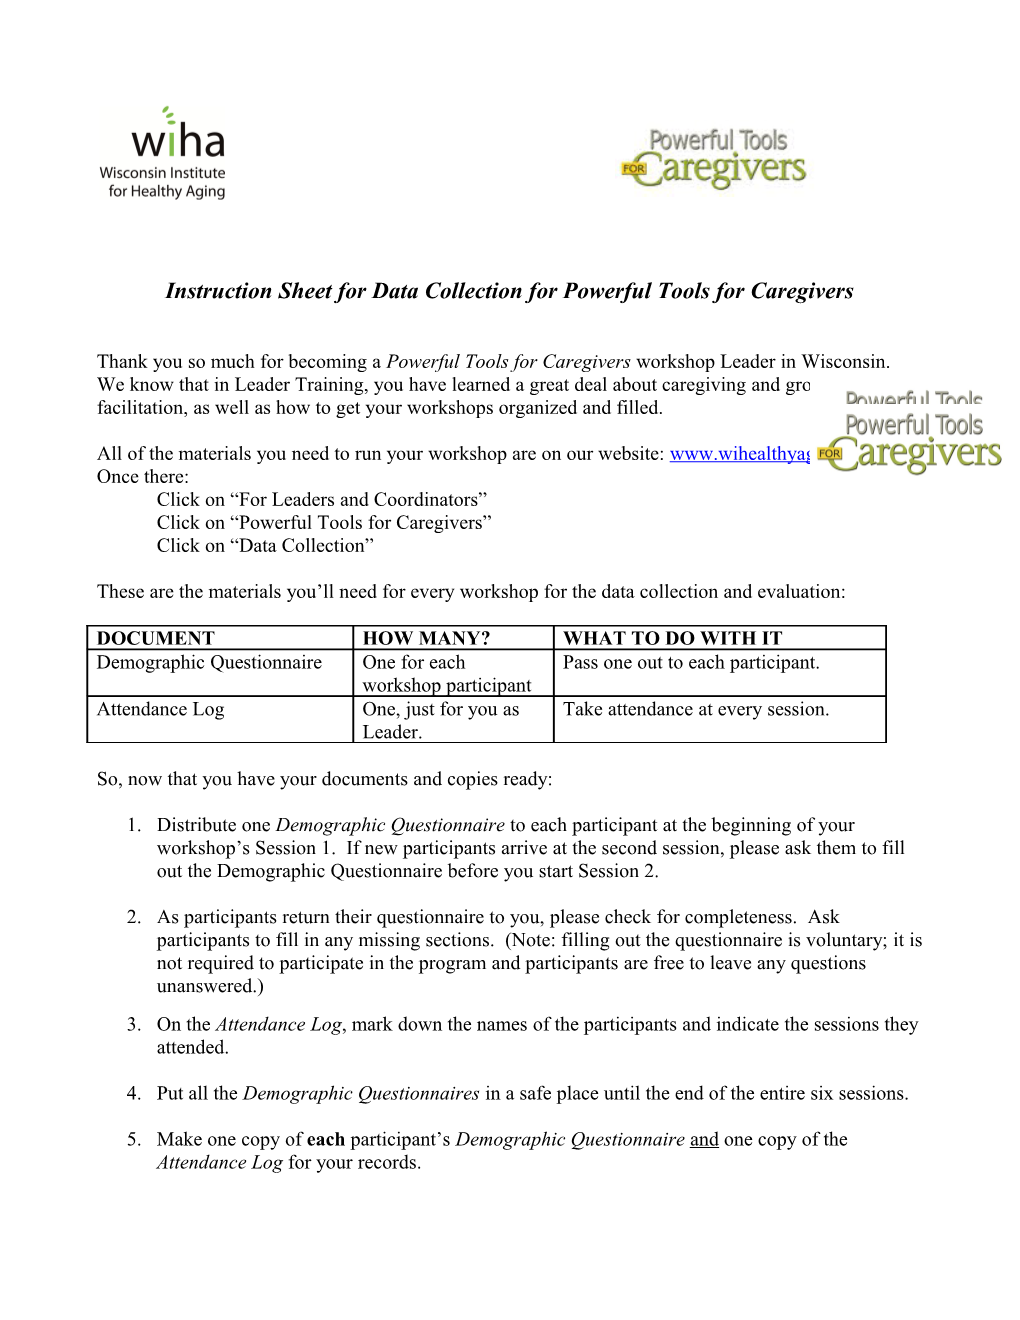 Instruction Sheet for Data Collection for Powerful Tools for Caregivers